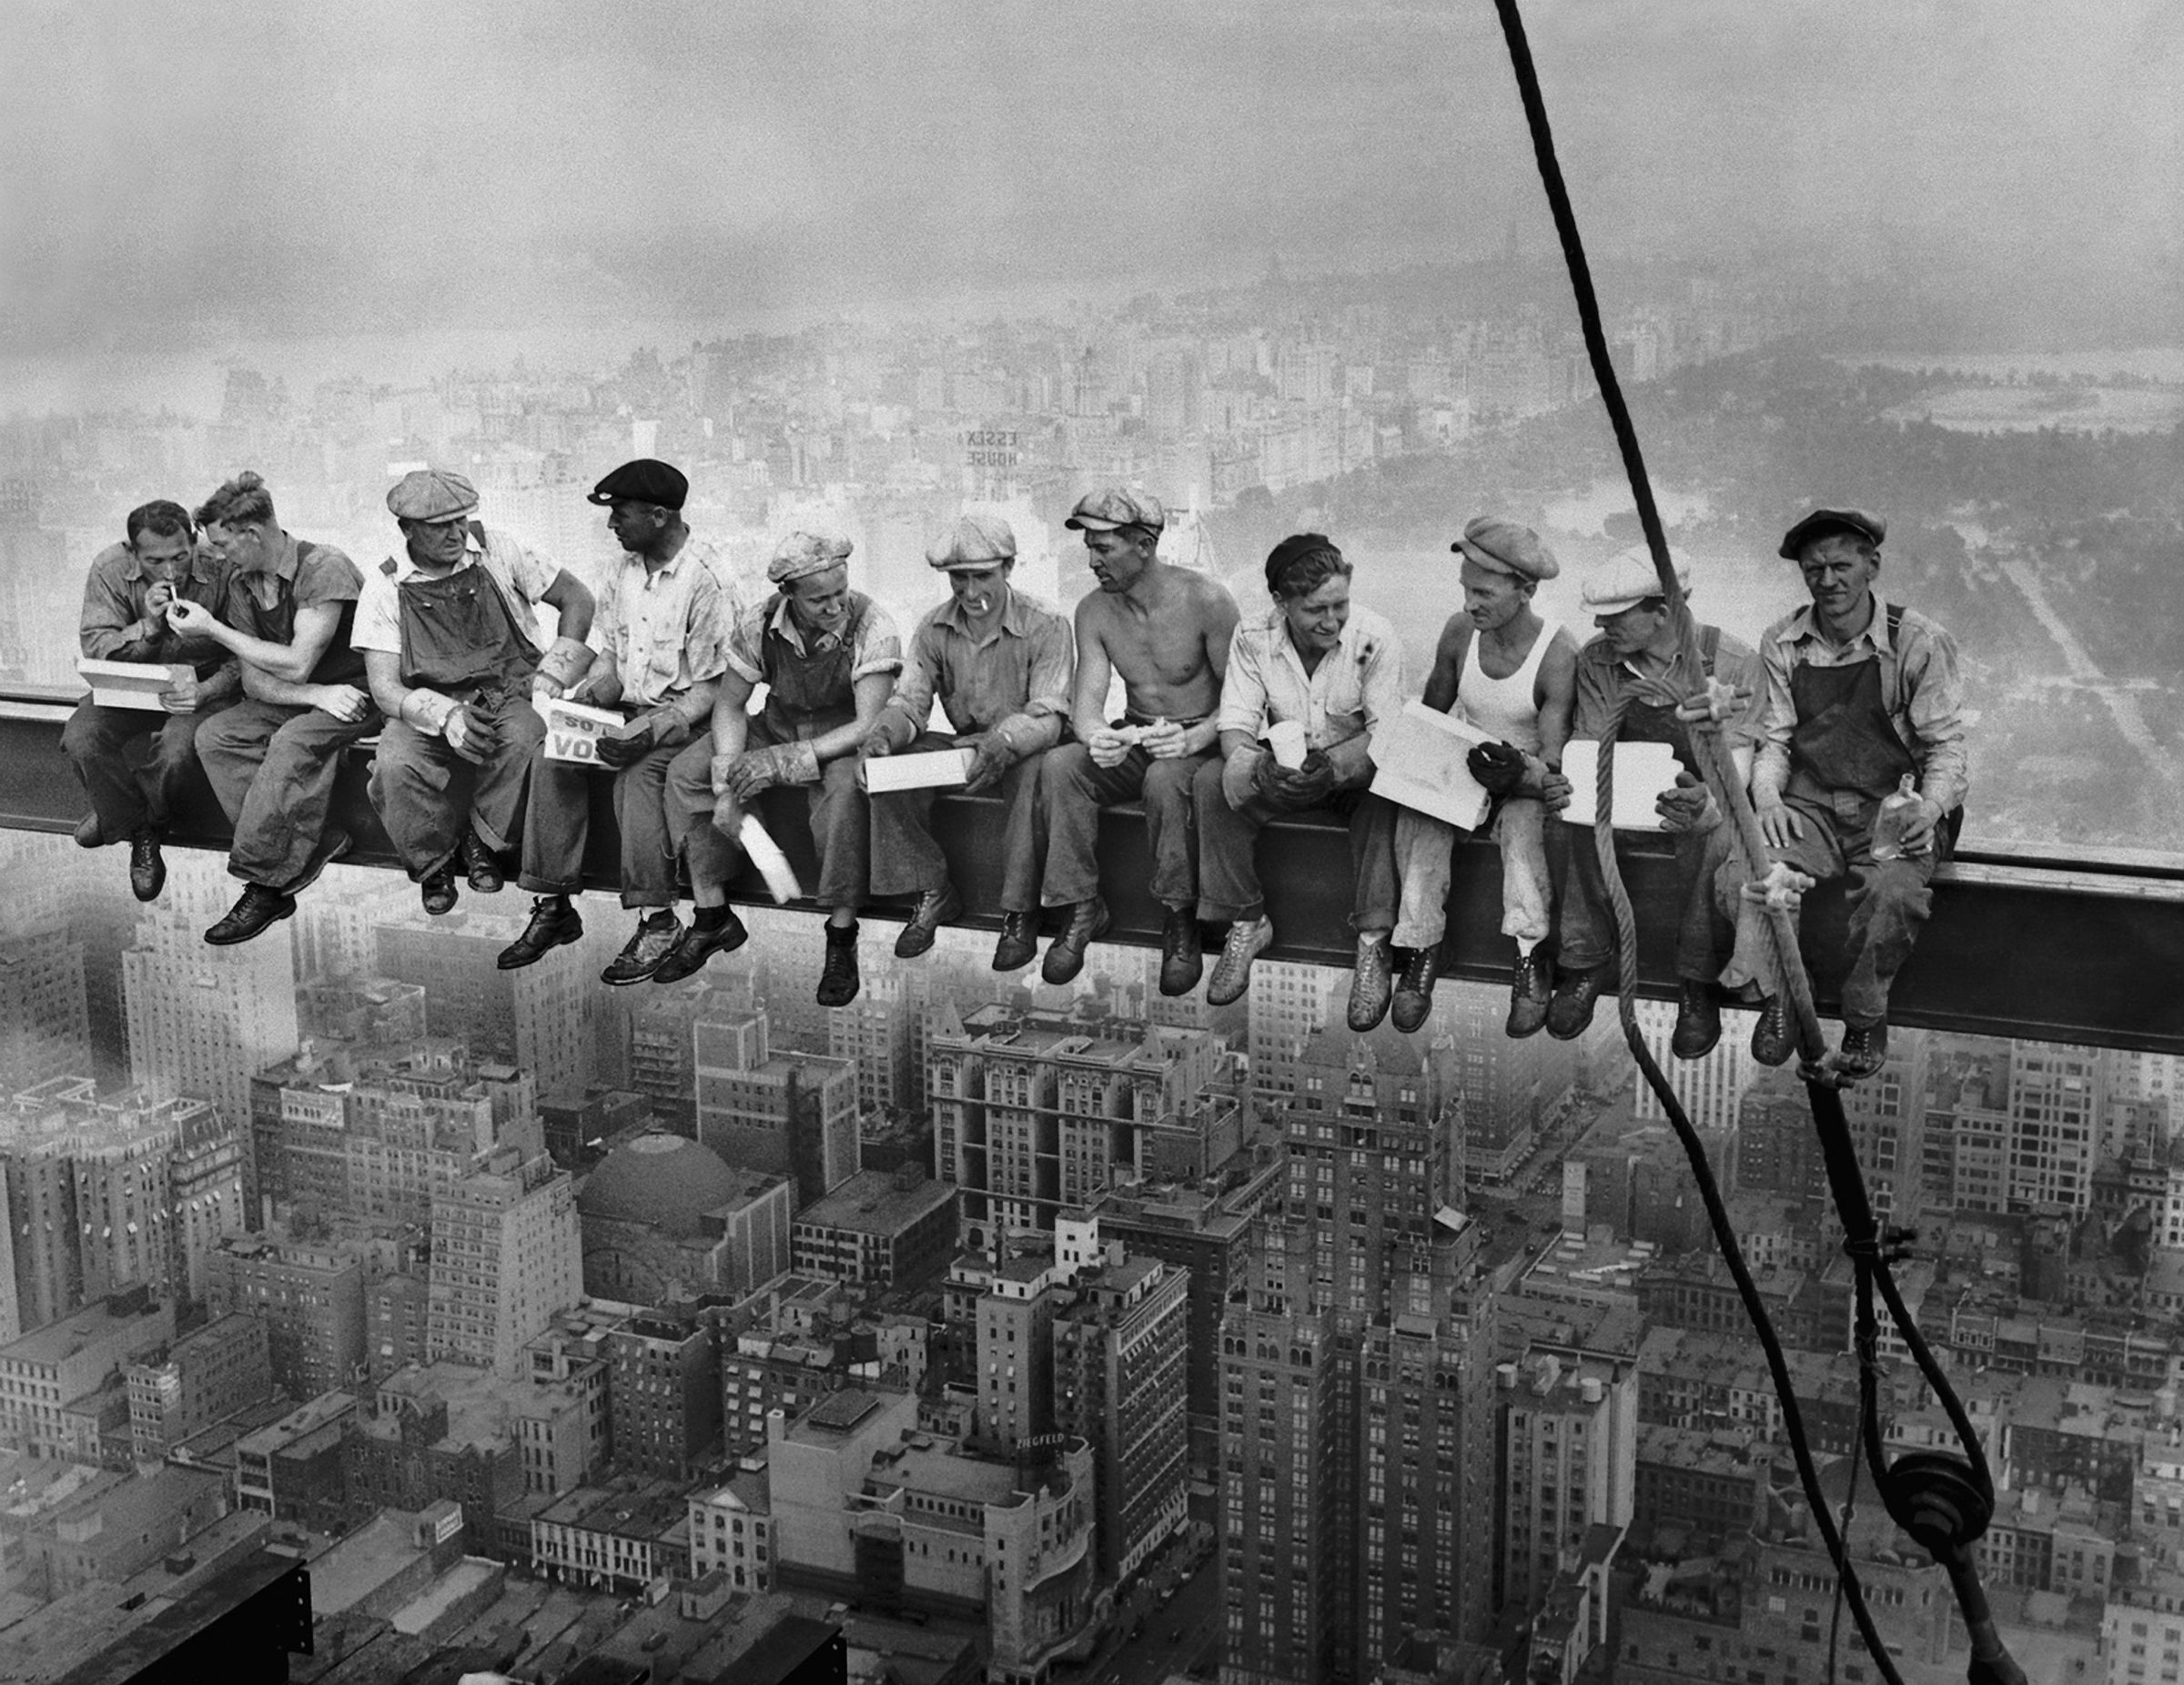 Das weltberühmte Luncheon-Foto vom Empire State Building, Oktober 1932 | Wikimedia Commons - Charles Clyde Ebbets